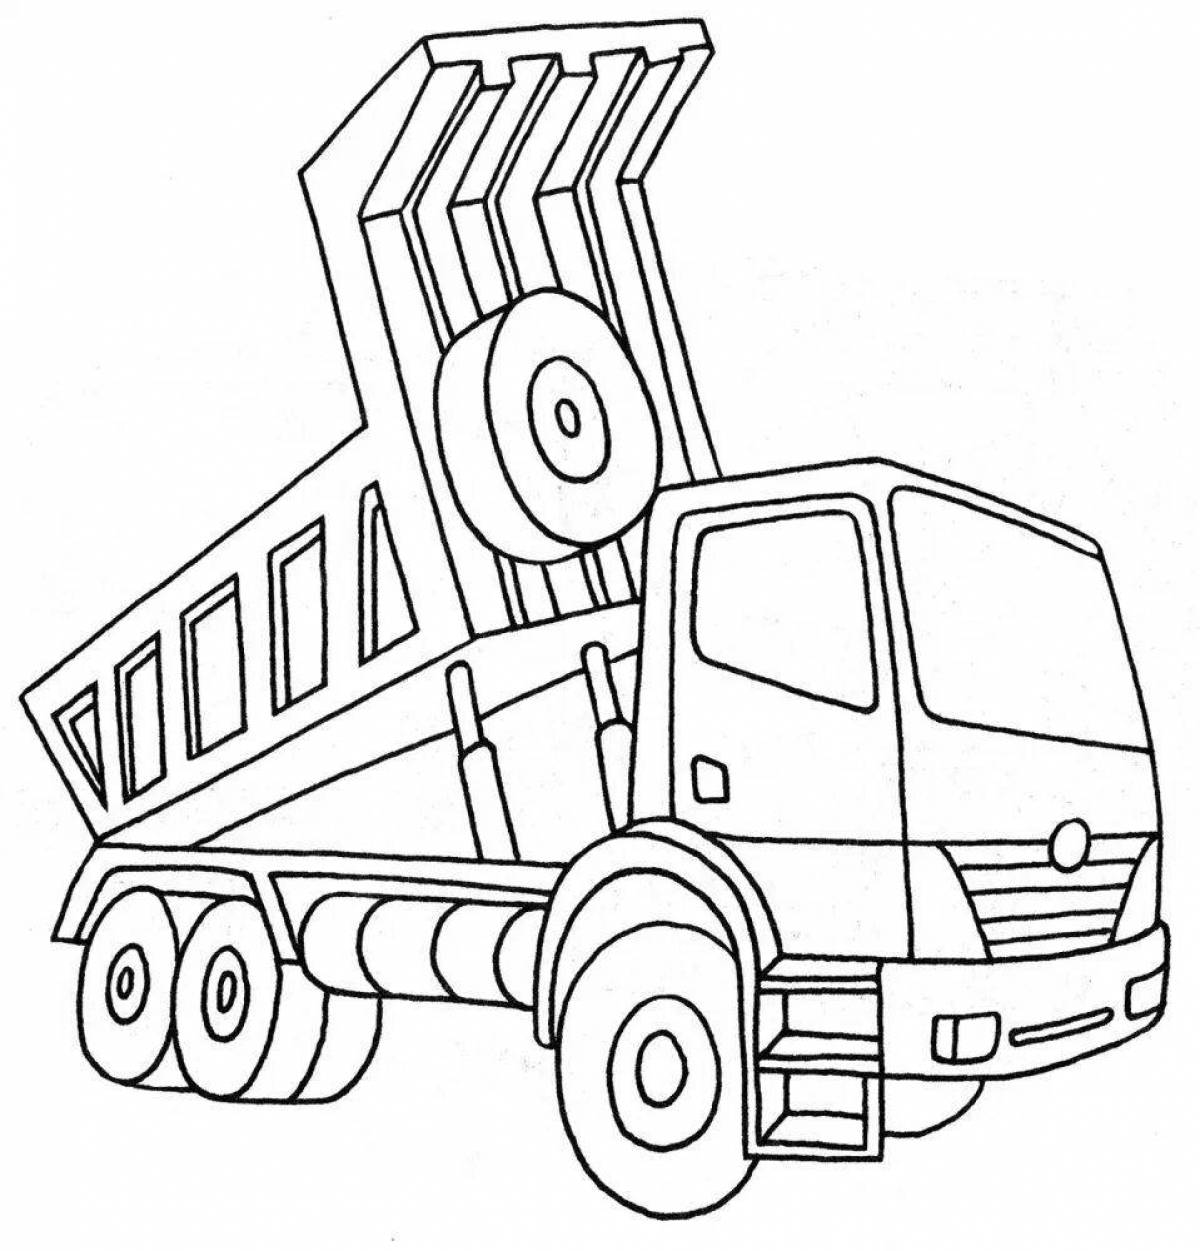 Fabulous dump truck coloring book for 4-5 year olds